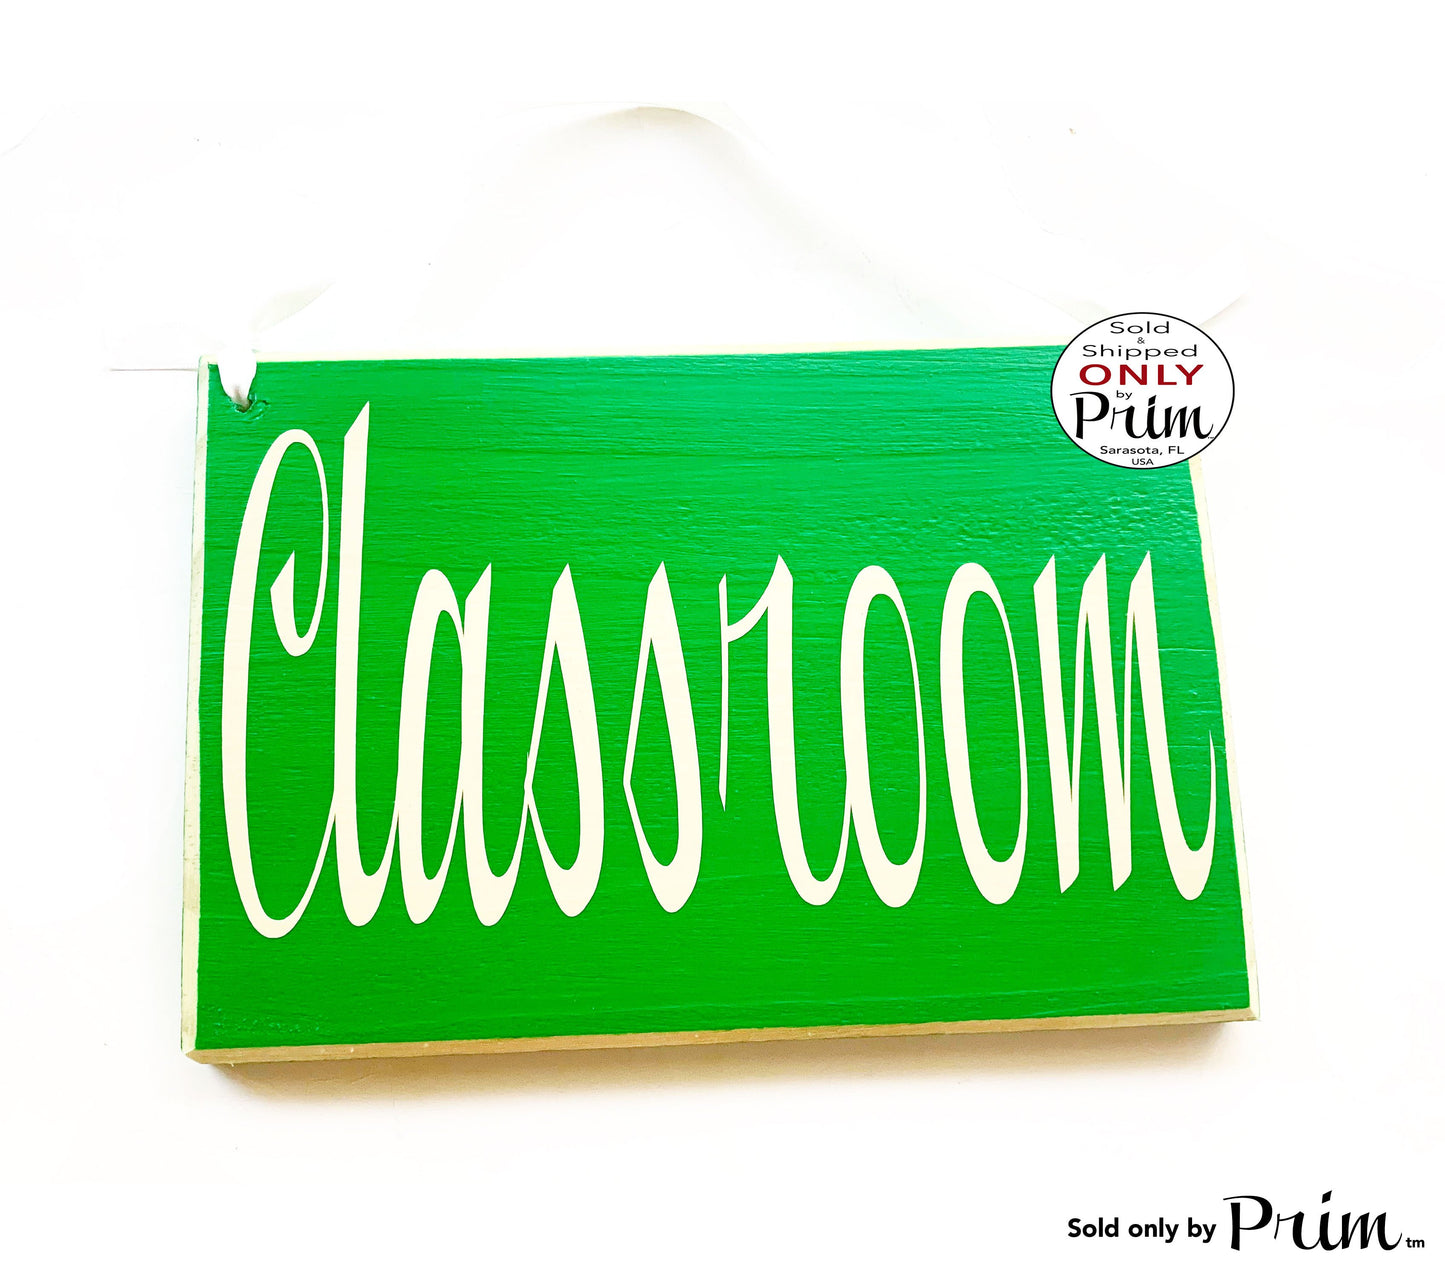 8x6 Classroom Custom Wood Sign Teacher Student School Counseling Academic Training Staff Meeting Conference Room Welcome Wall Door Plaque